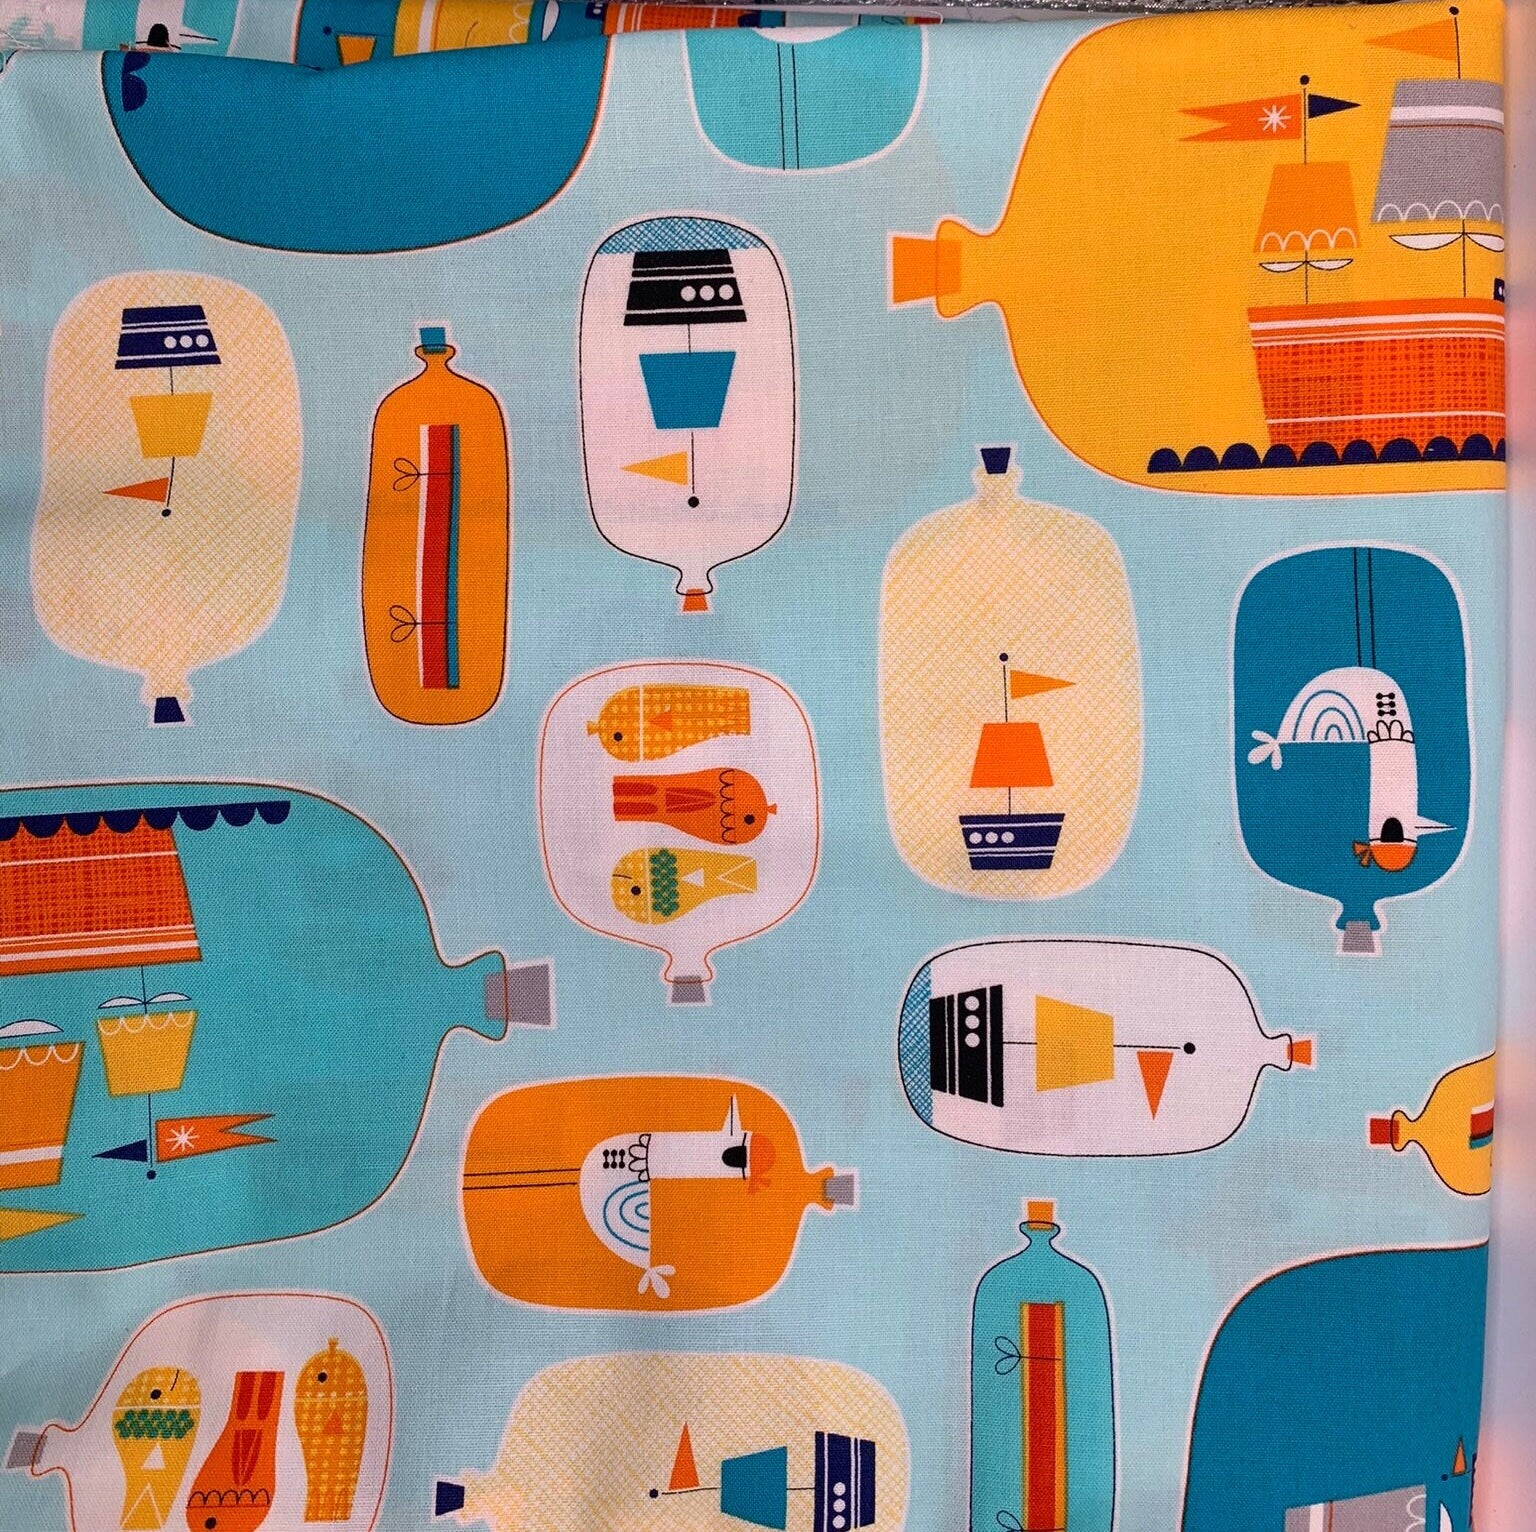 High Quality Quilt Fabric-Sold by the Yard-Robert Kaufman-Ships in a Bottle-100% Cotton Fabric